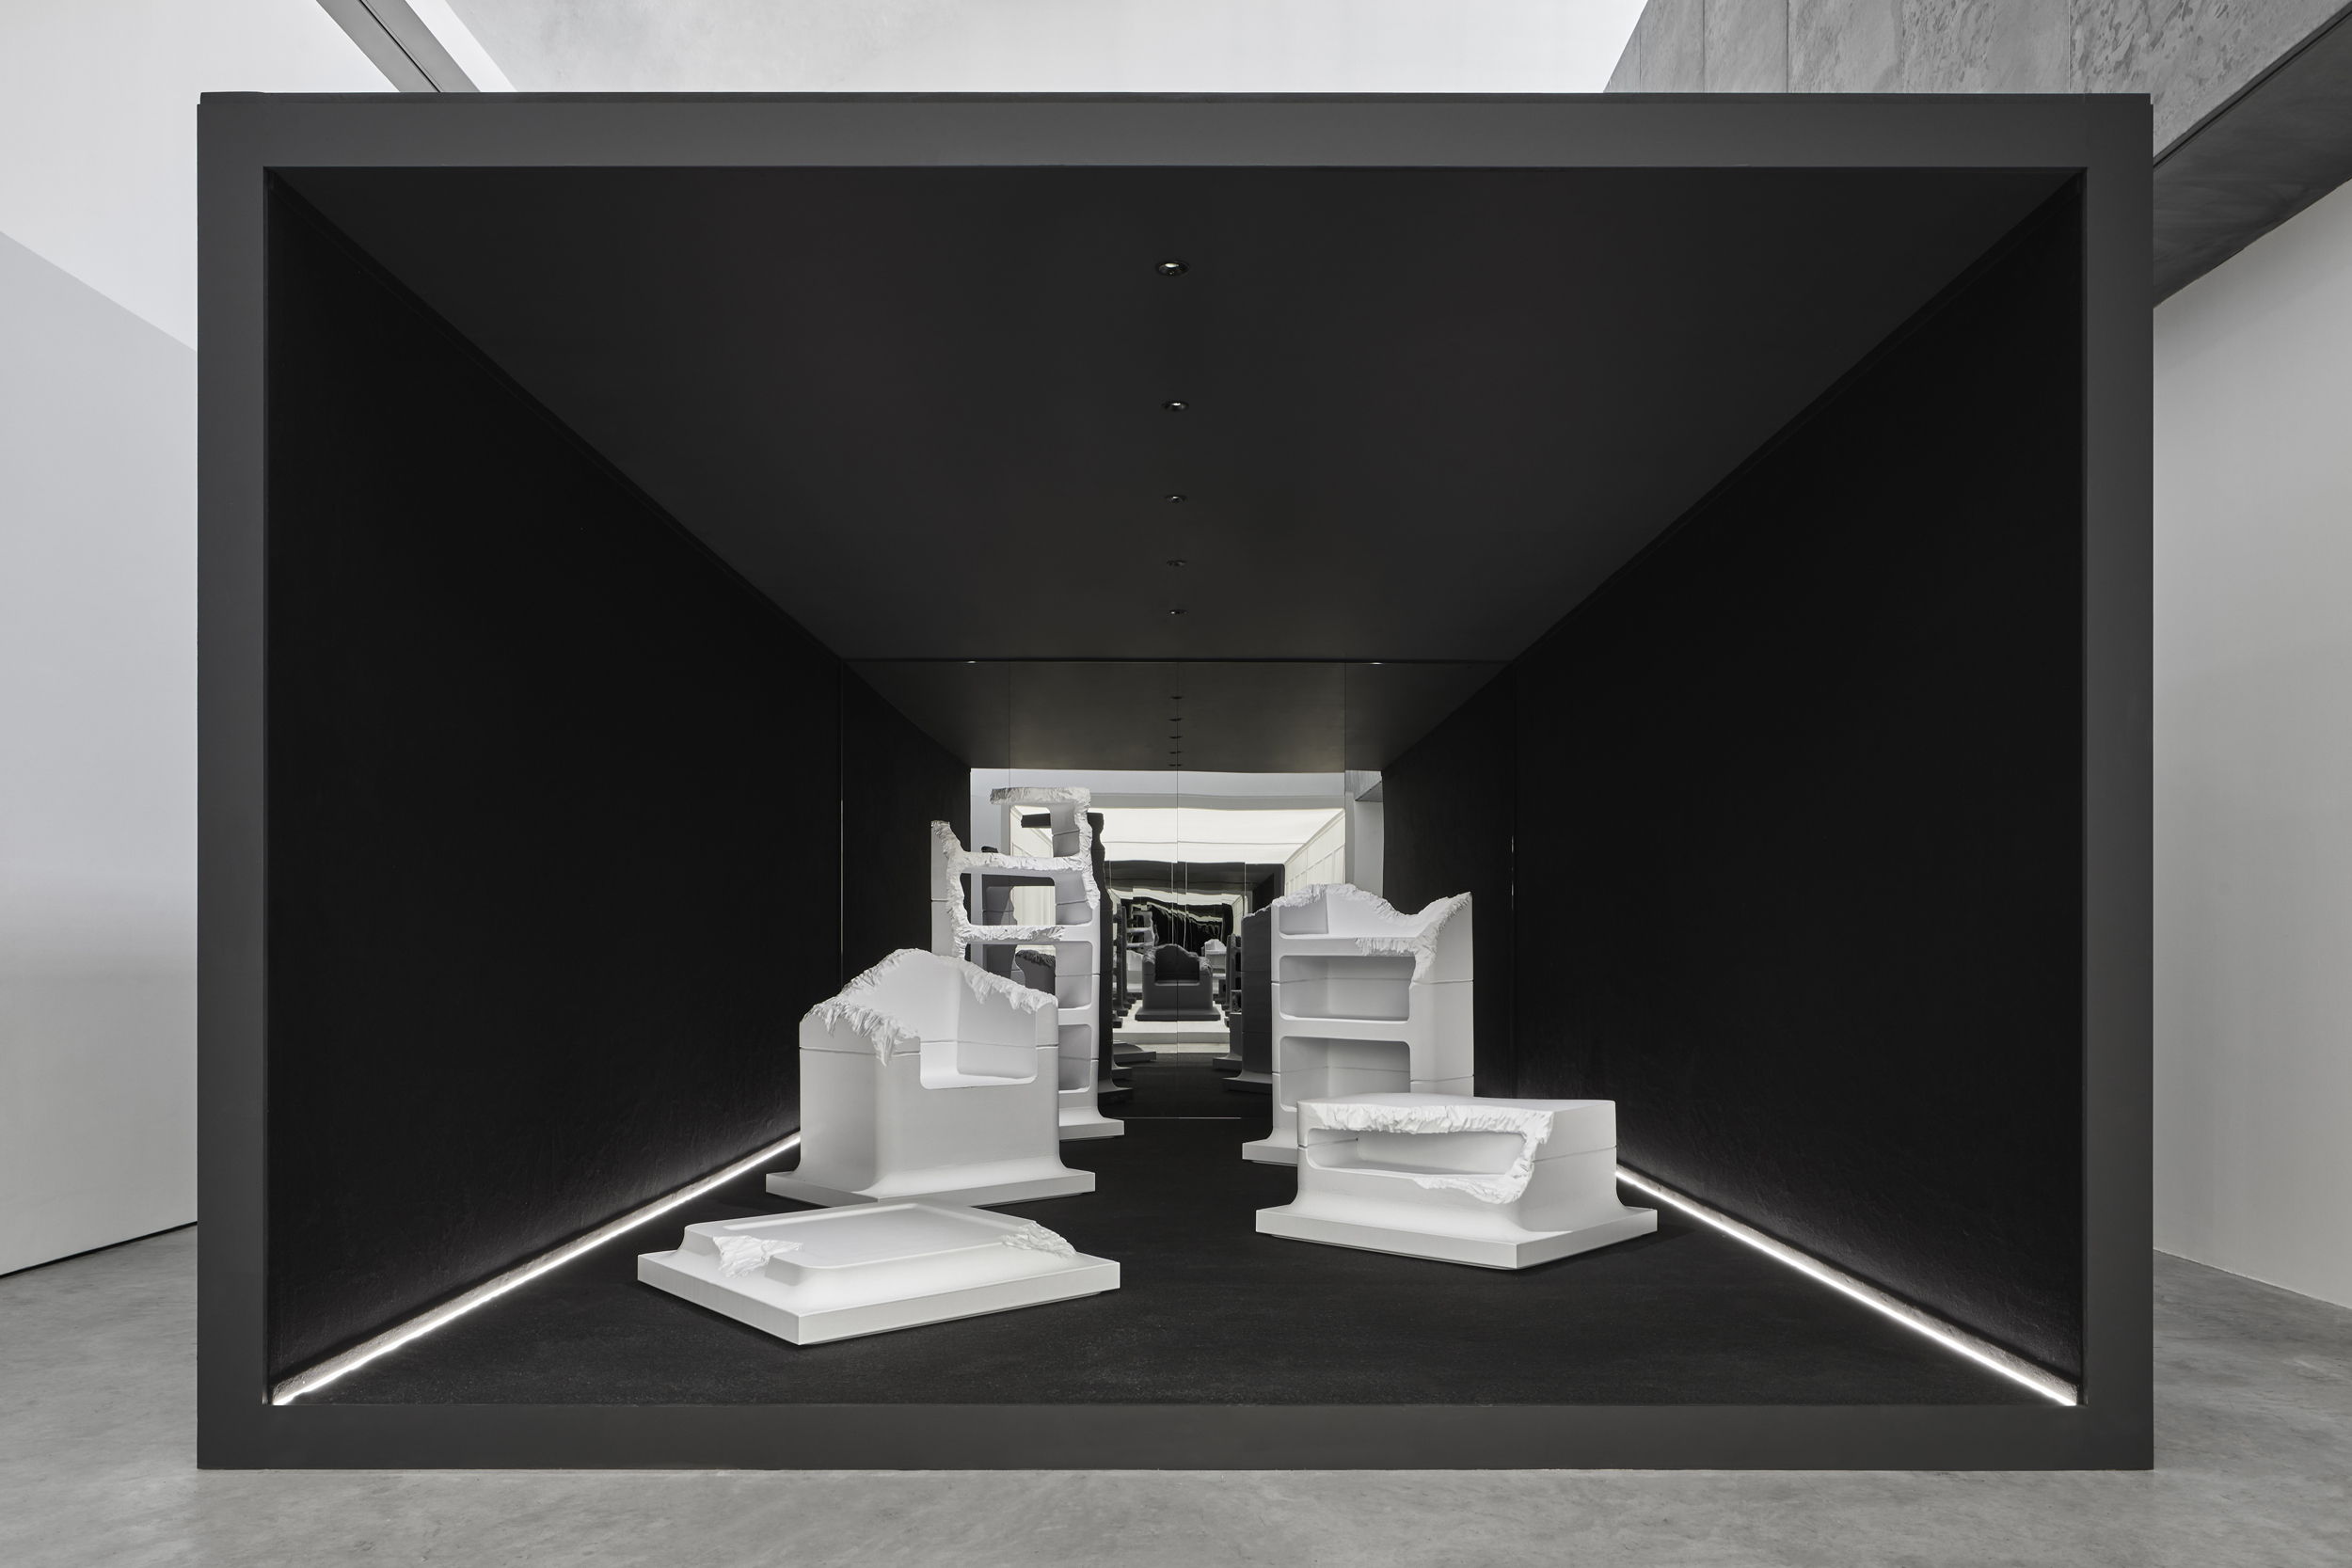 'THE SCULPTED SERIES' designed by Snarkitecture for Gufram